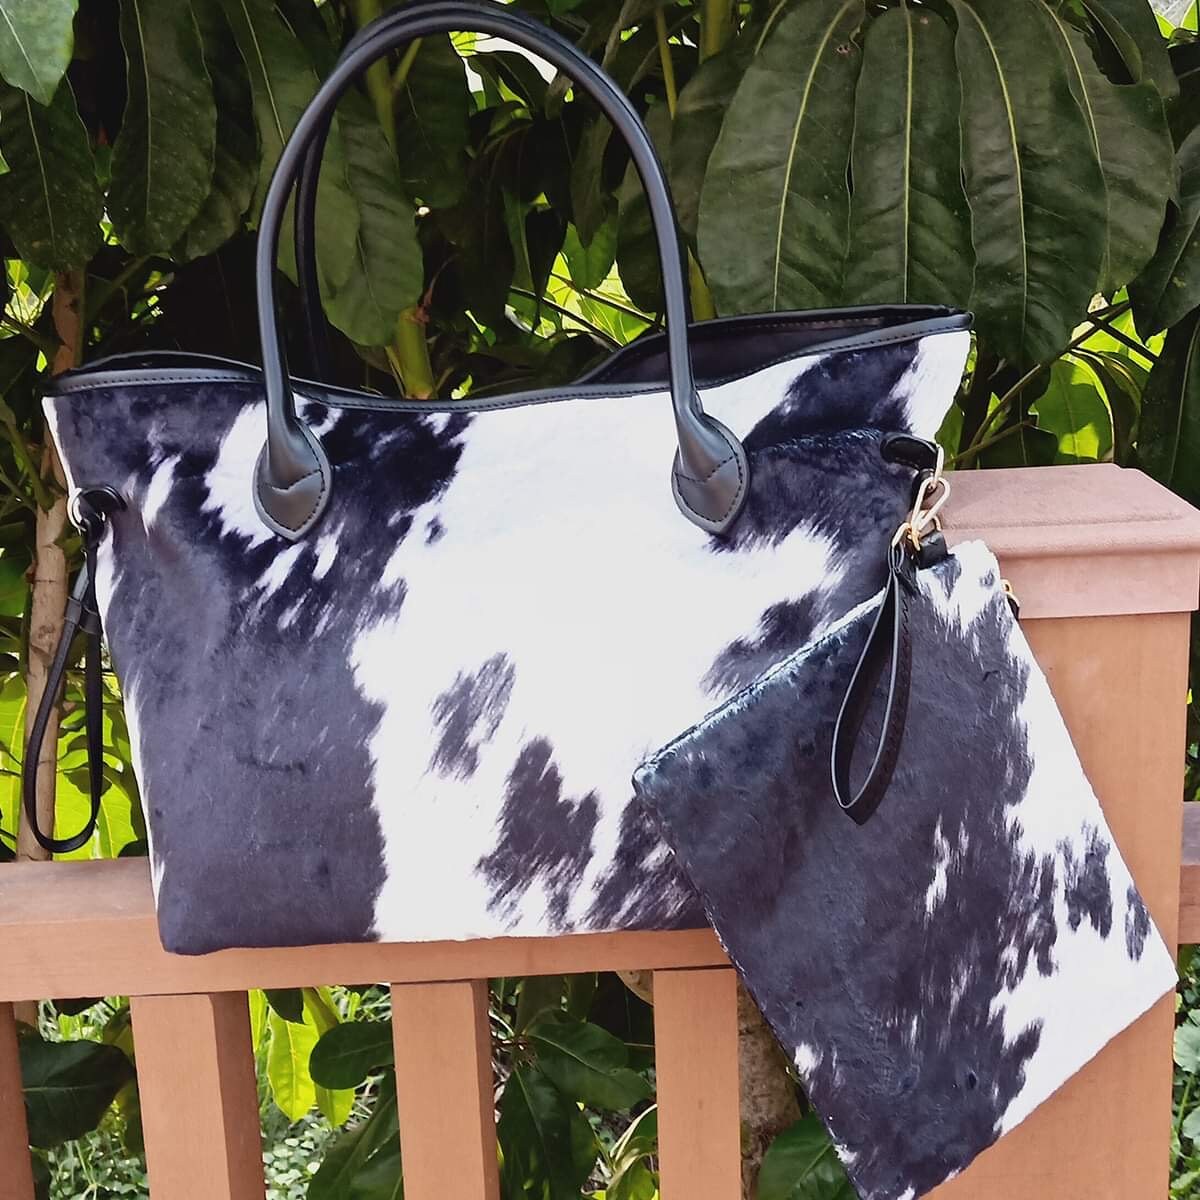 Black Cow Print Tote, Purse, Wristlet, Travel Bag, Gift, Personalized, Embroidered